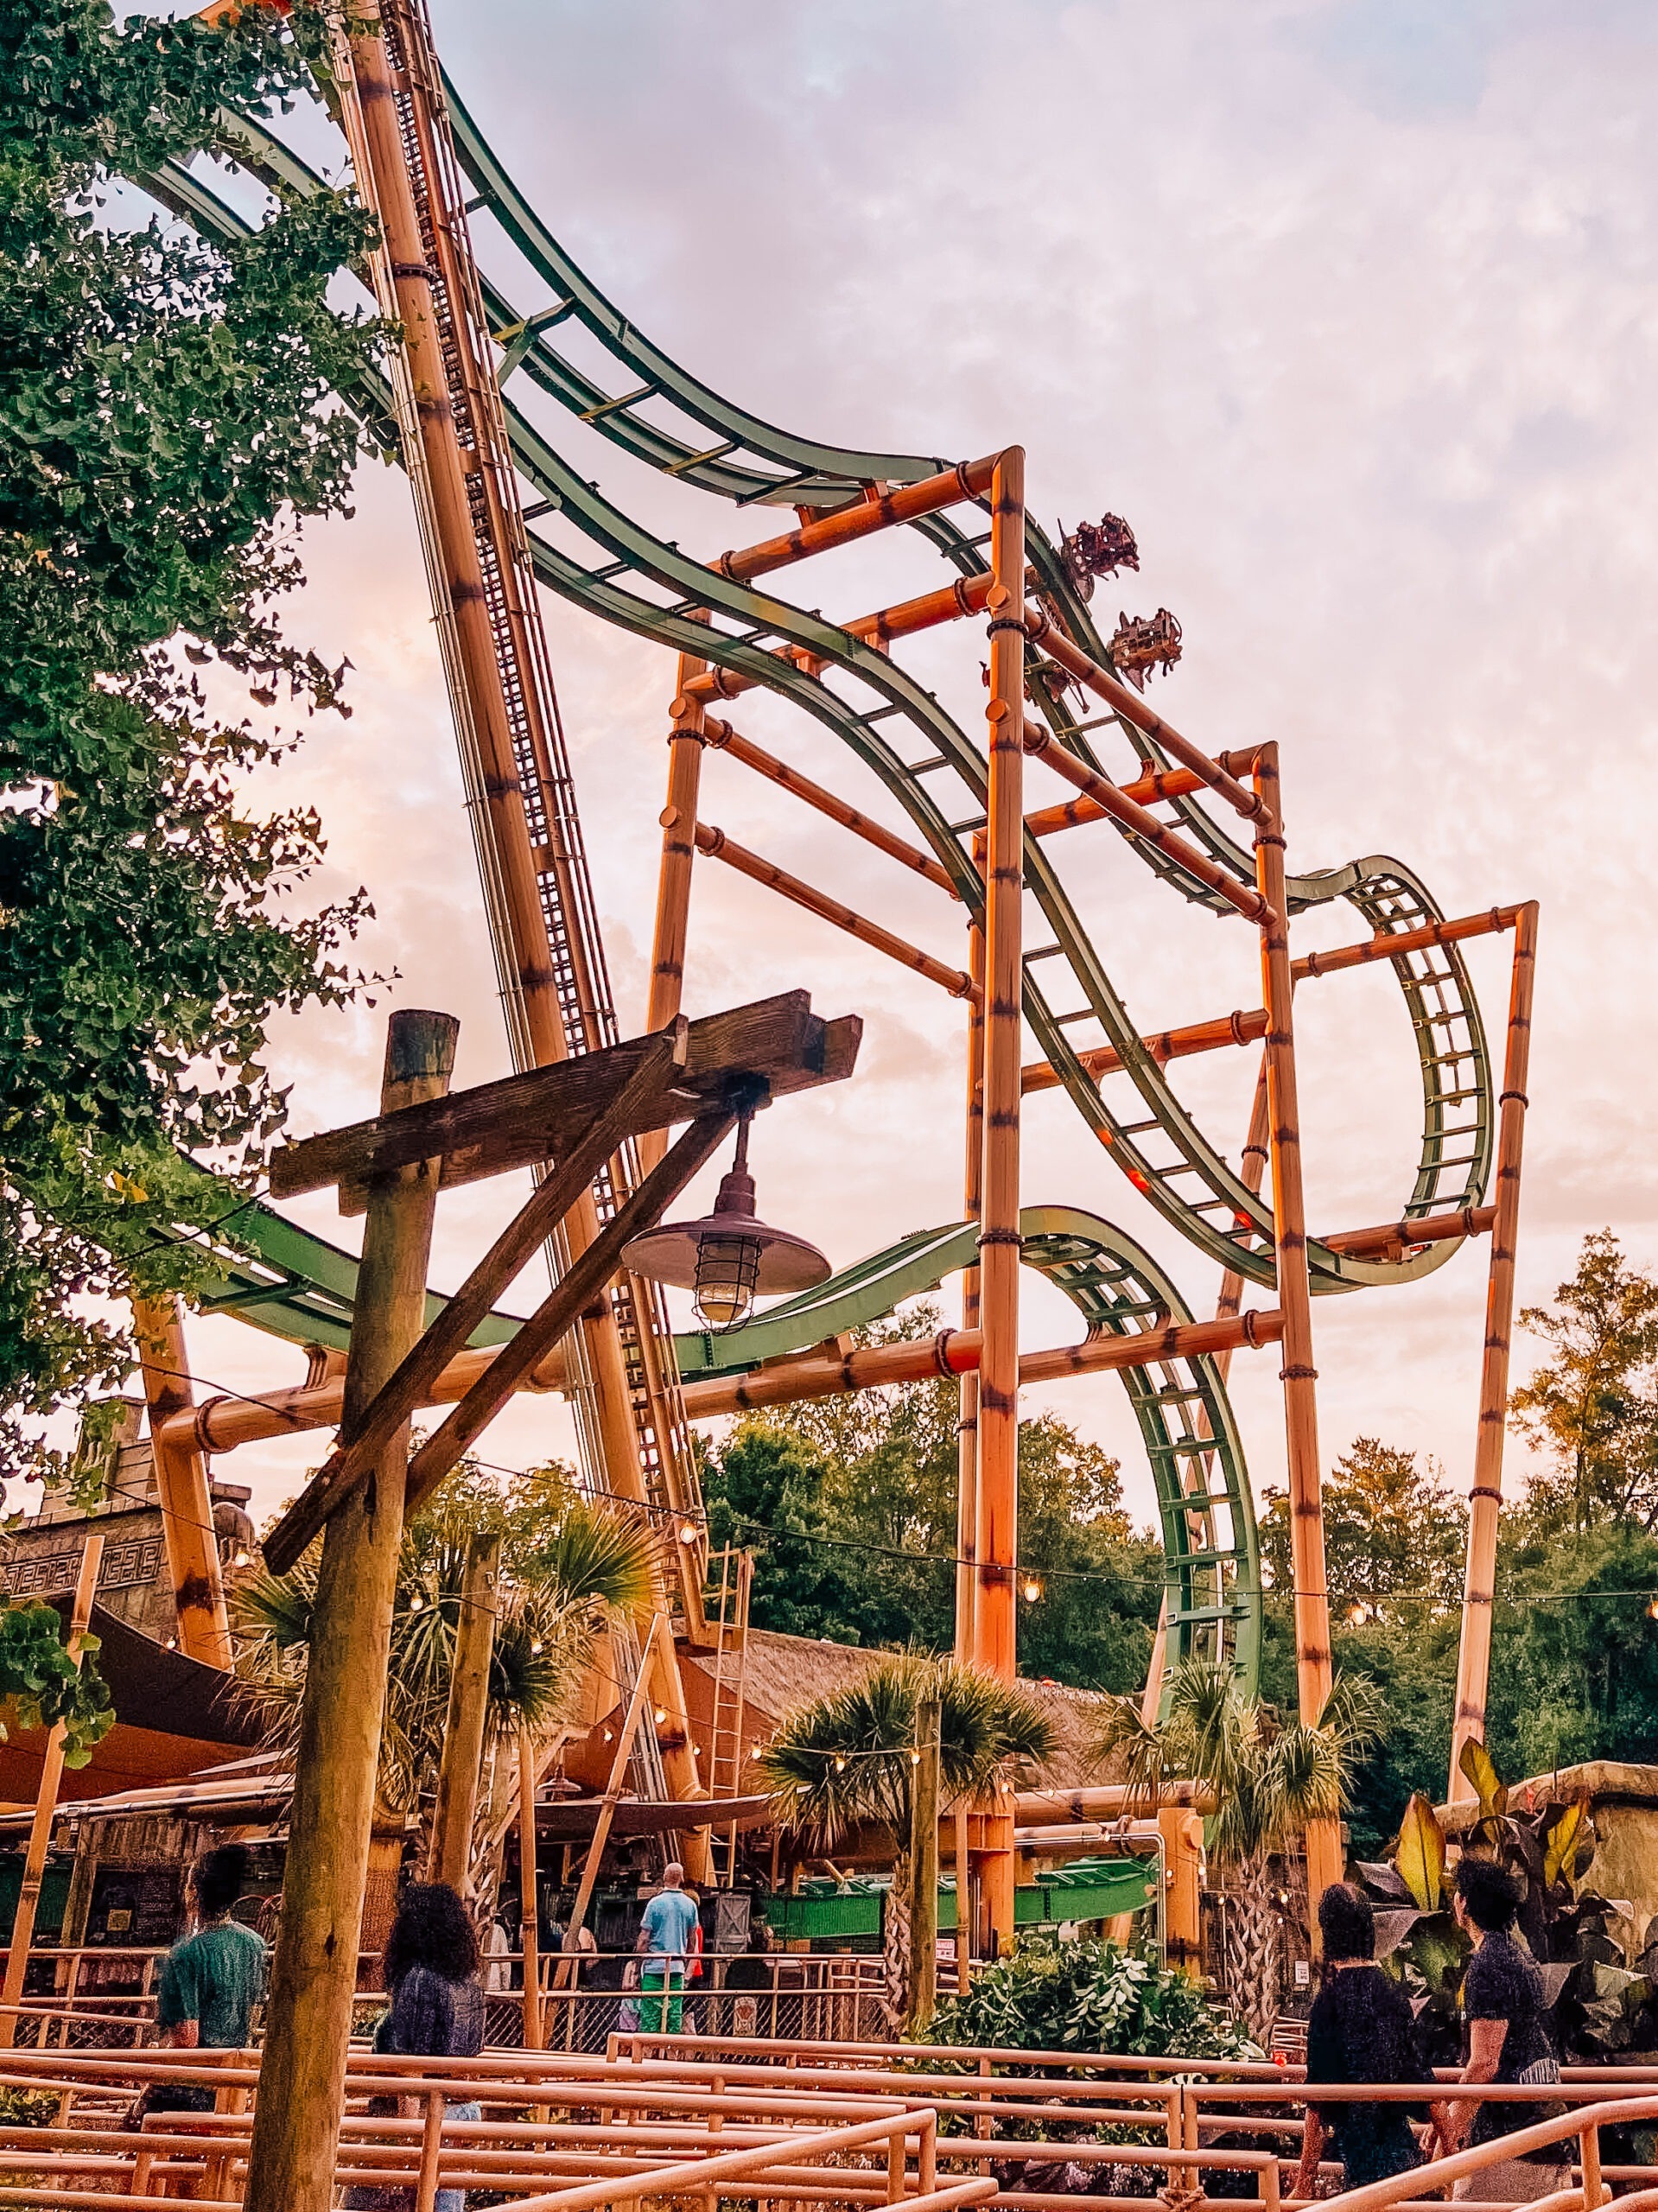 Get $25 Off: Official Kings Dominion Discount Tickets